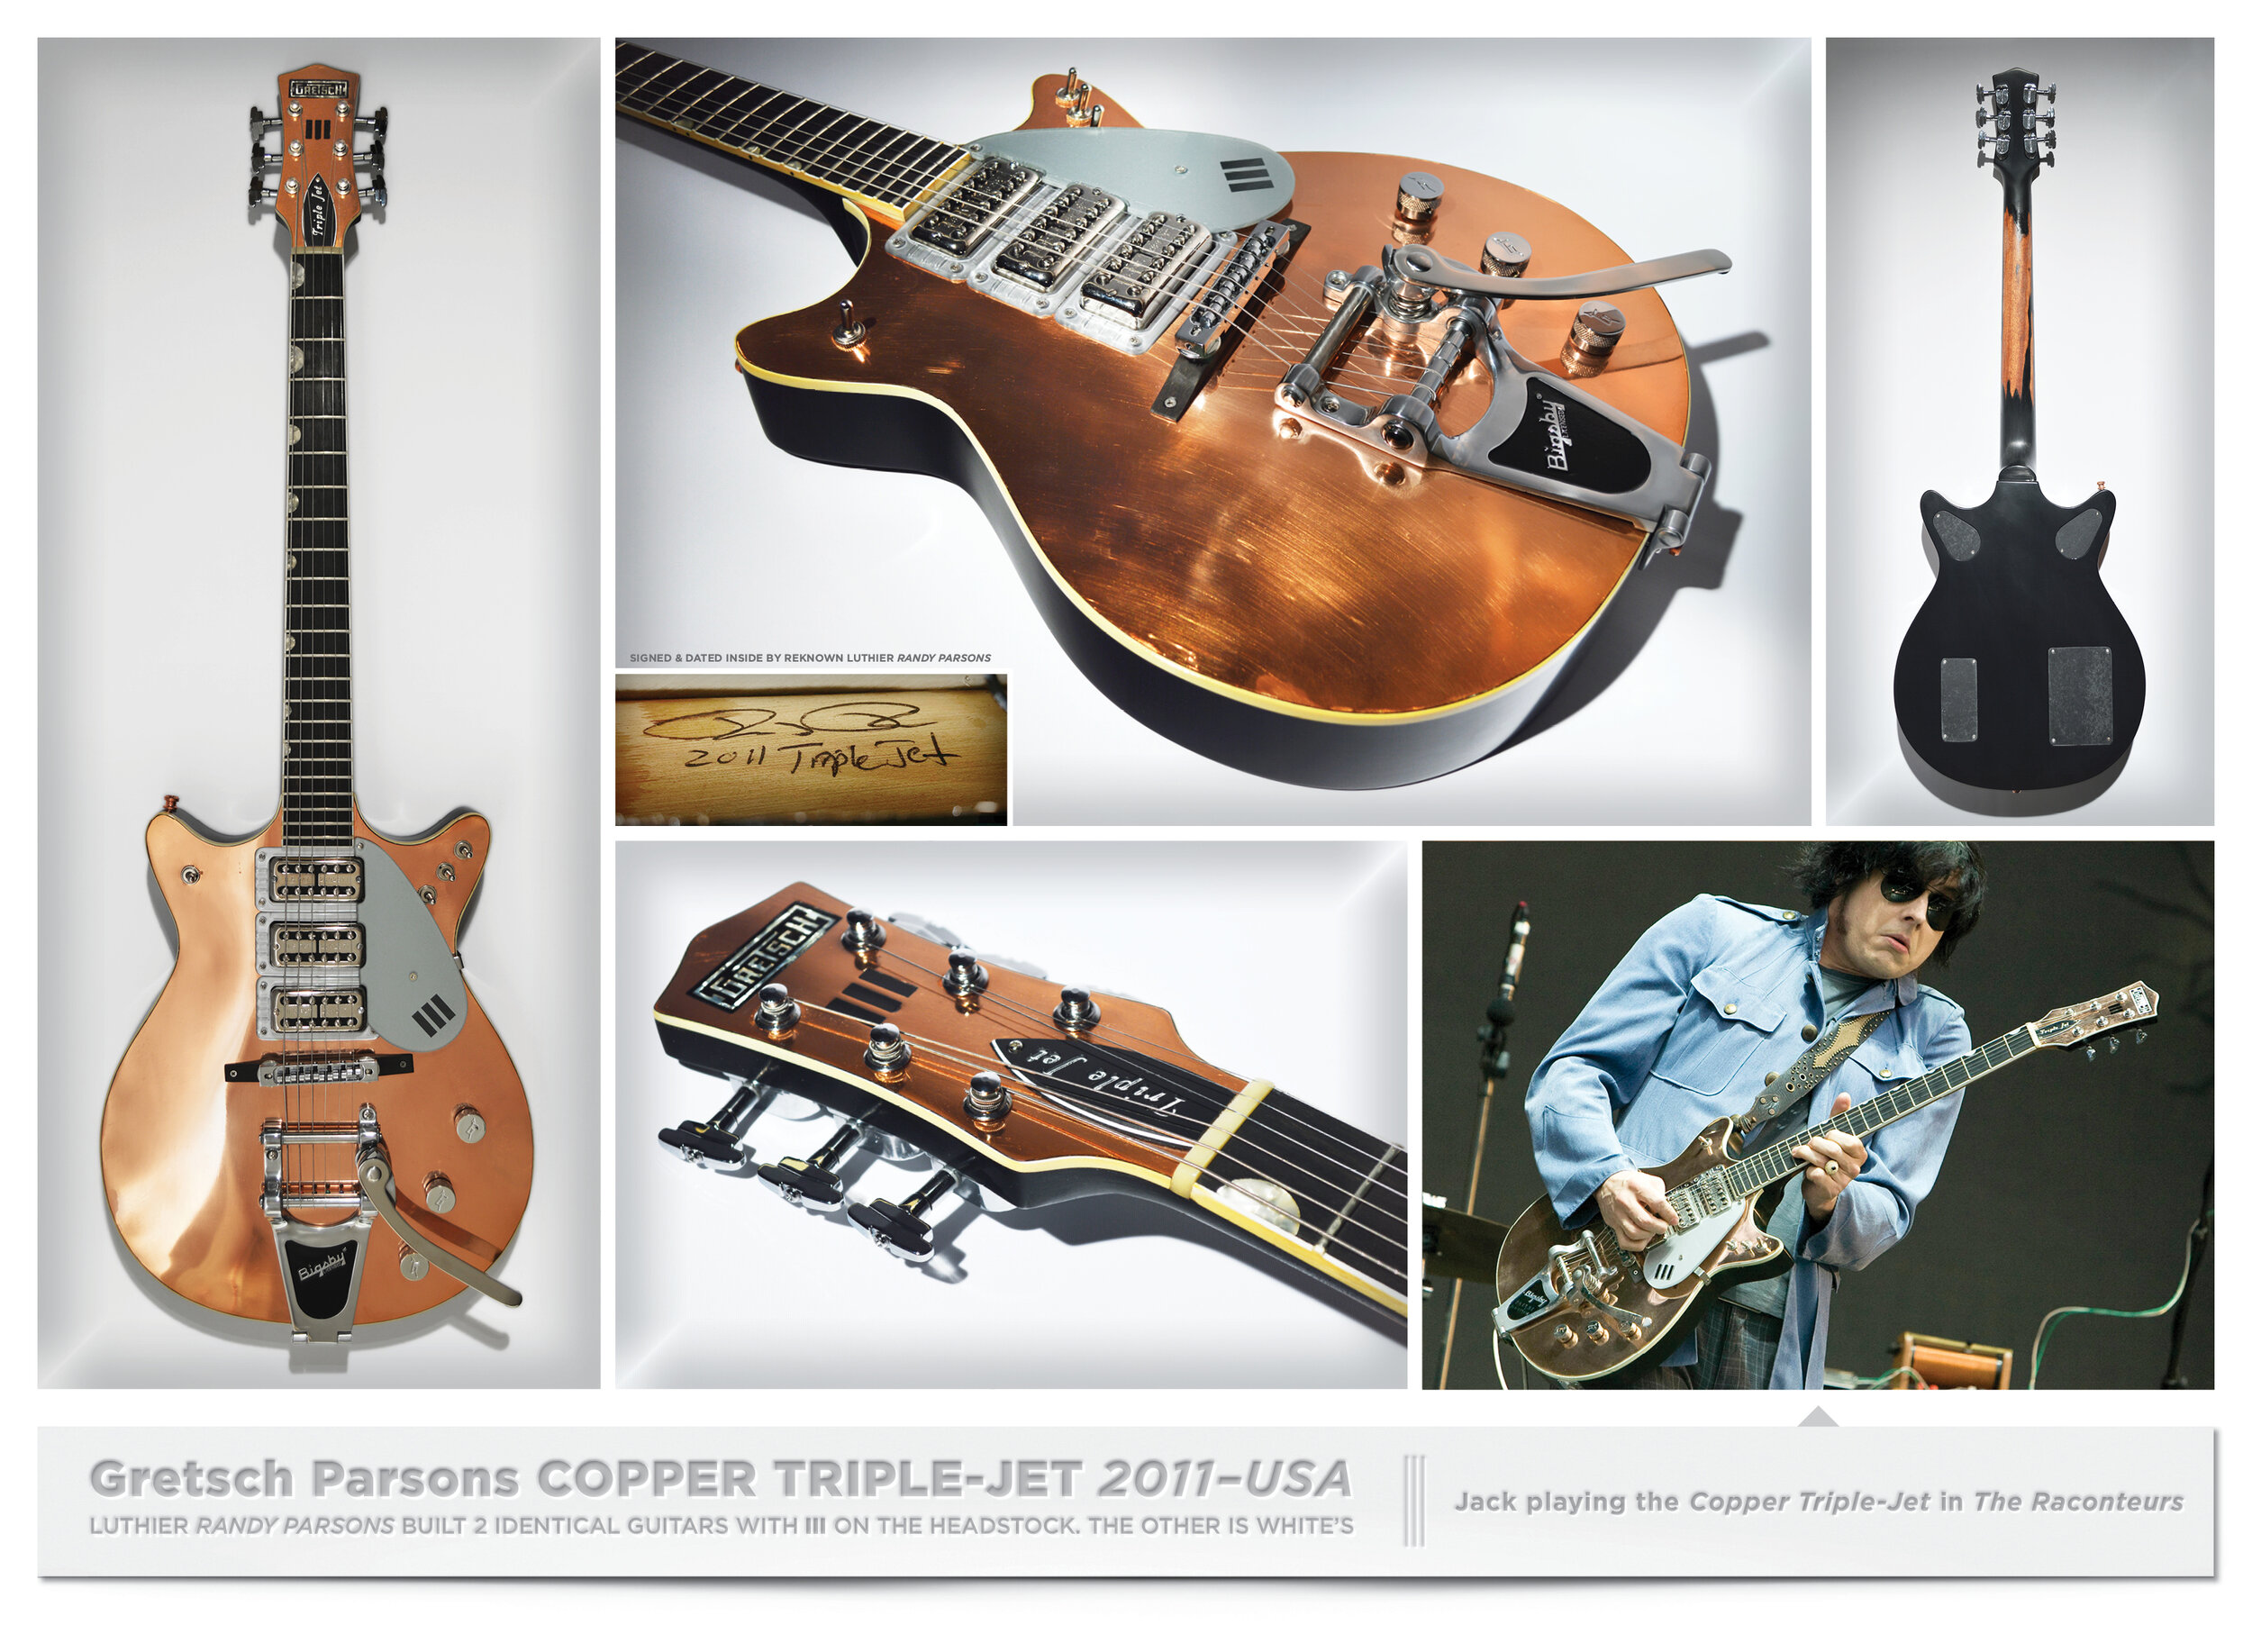 7 Gretsch Parsons COPPER TRIPLE-JET 2011–USA THE JACK WHITE GUITAR COLLECTION FINAL LAYOUT7.jpg